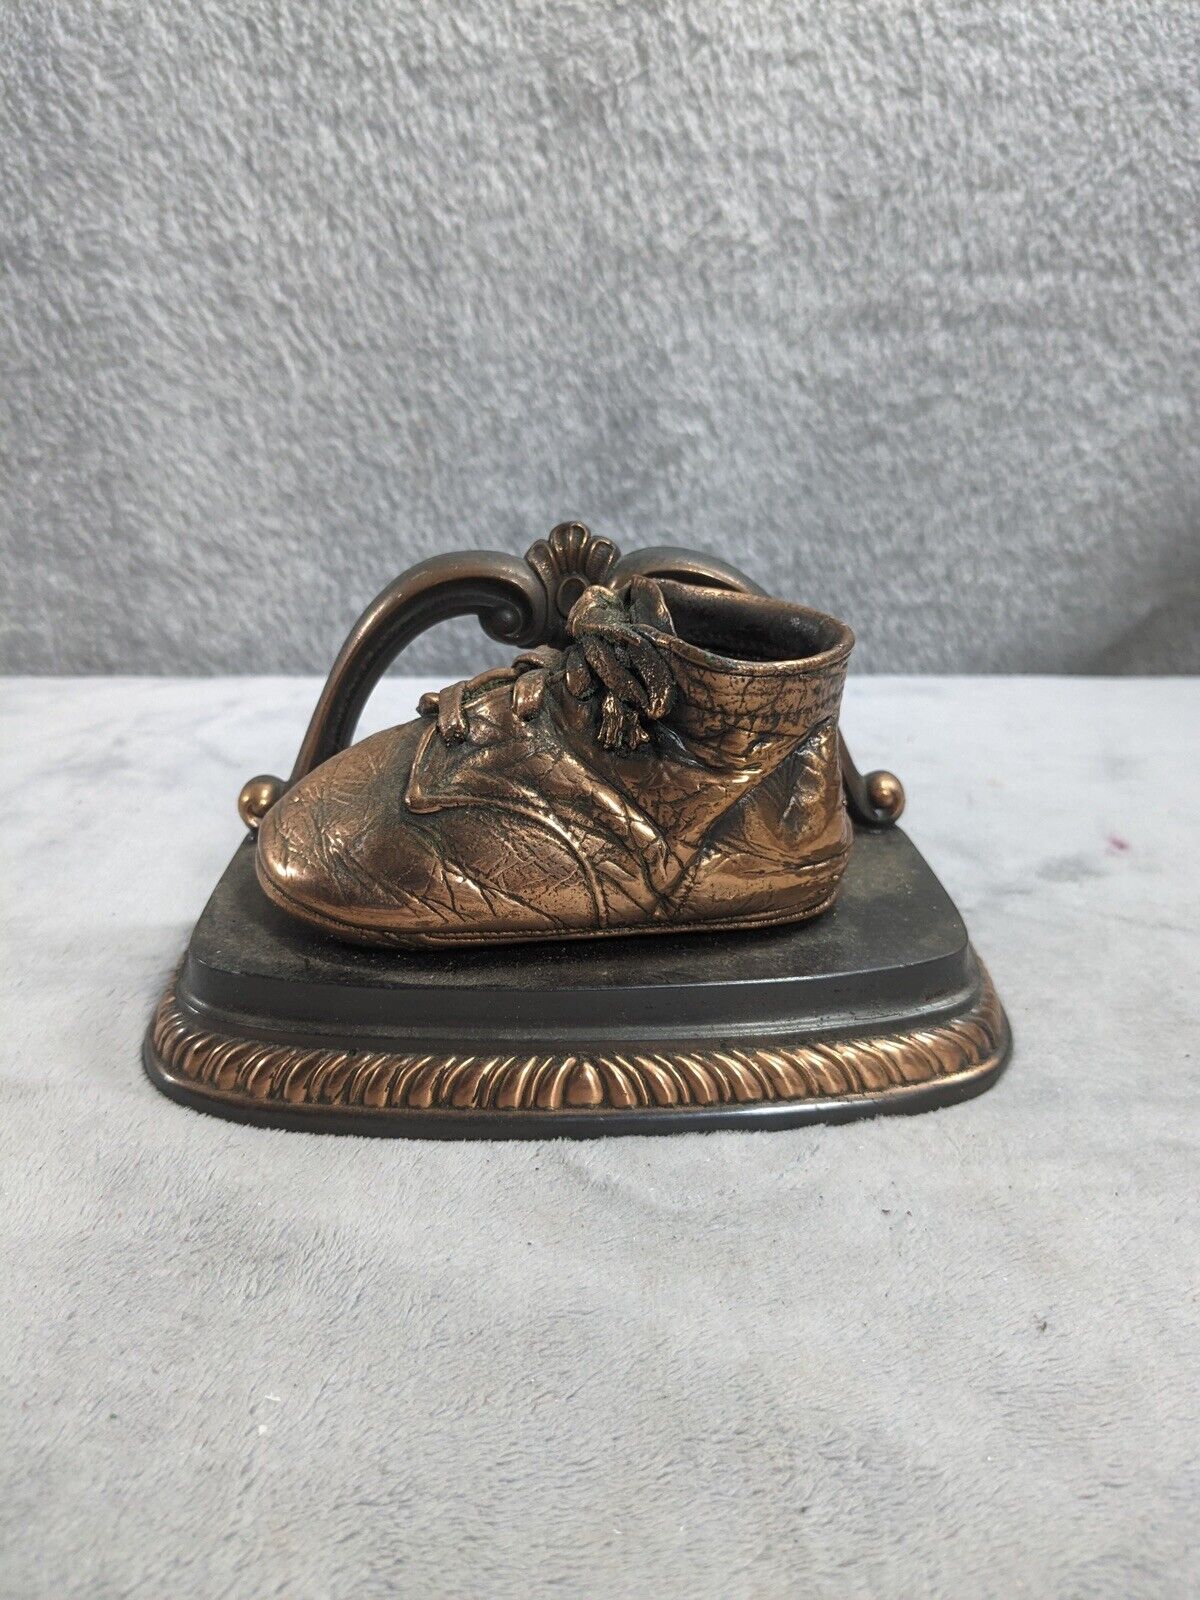 Vintage Heavy Bronze Copper Baby Shoe Bookend Or Paper Weight 4” Tall